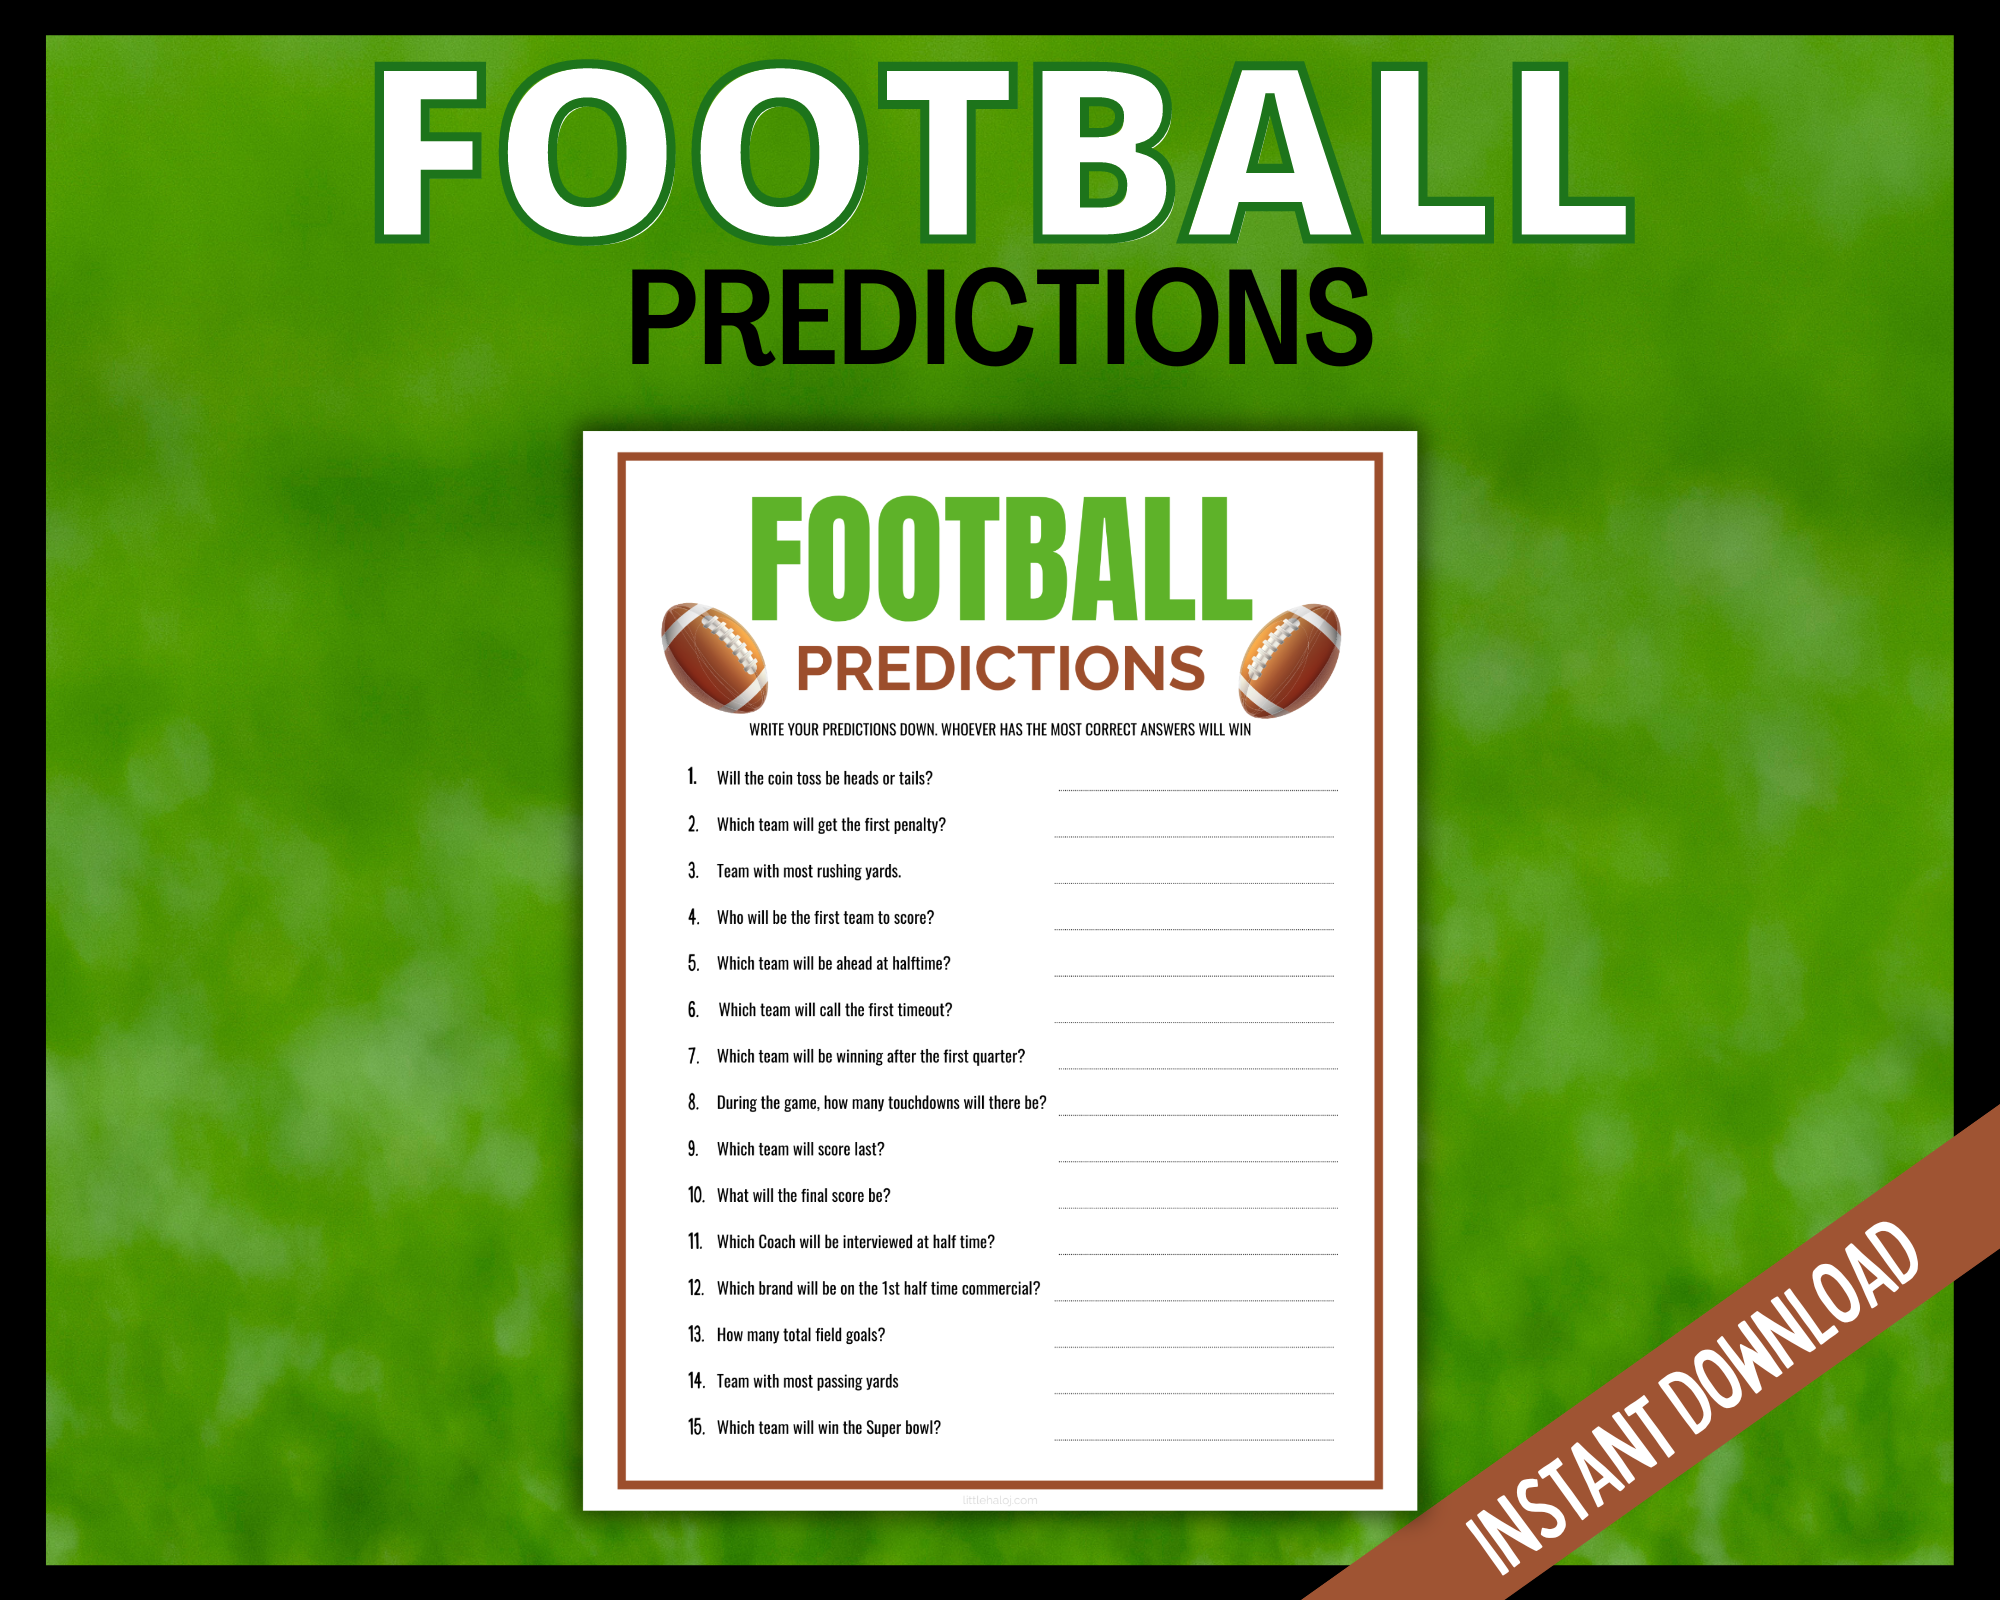 Today's Football Predictions